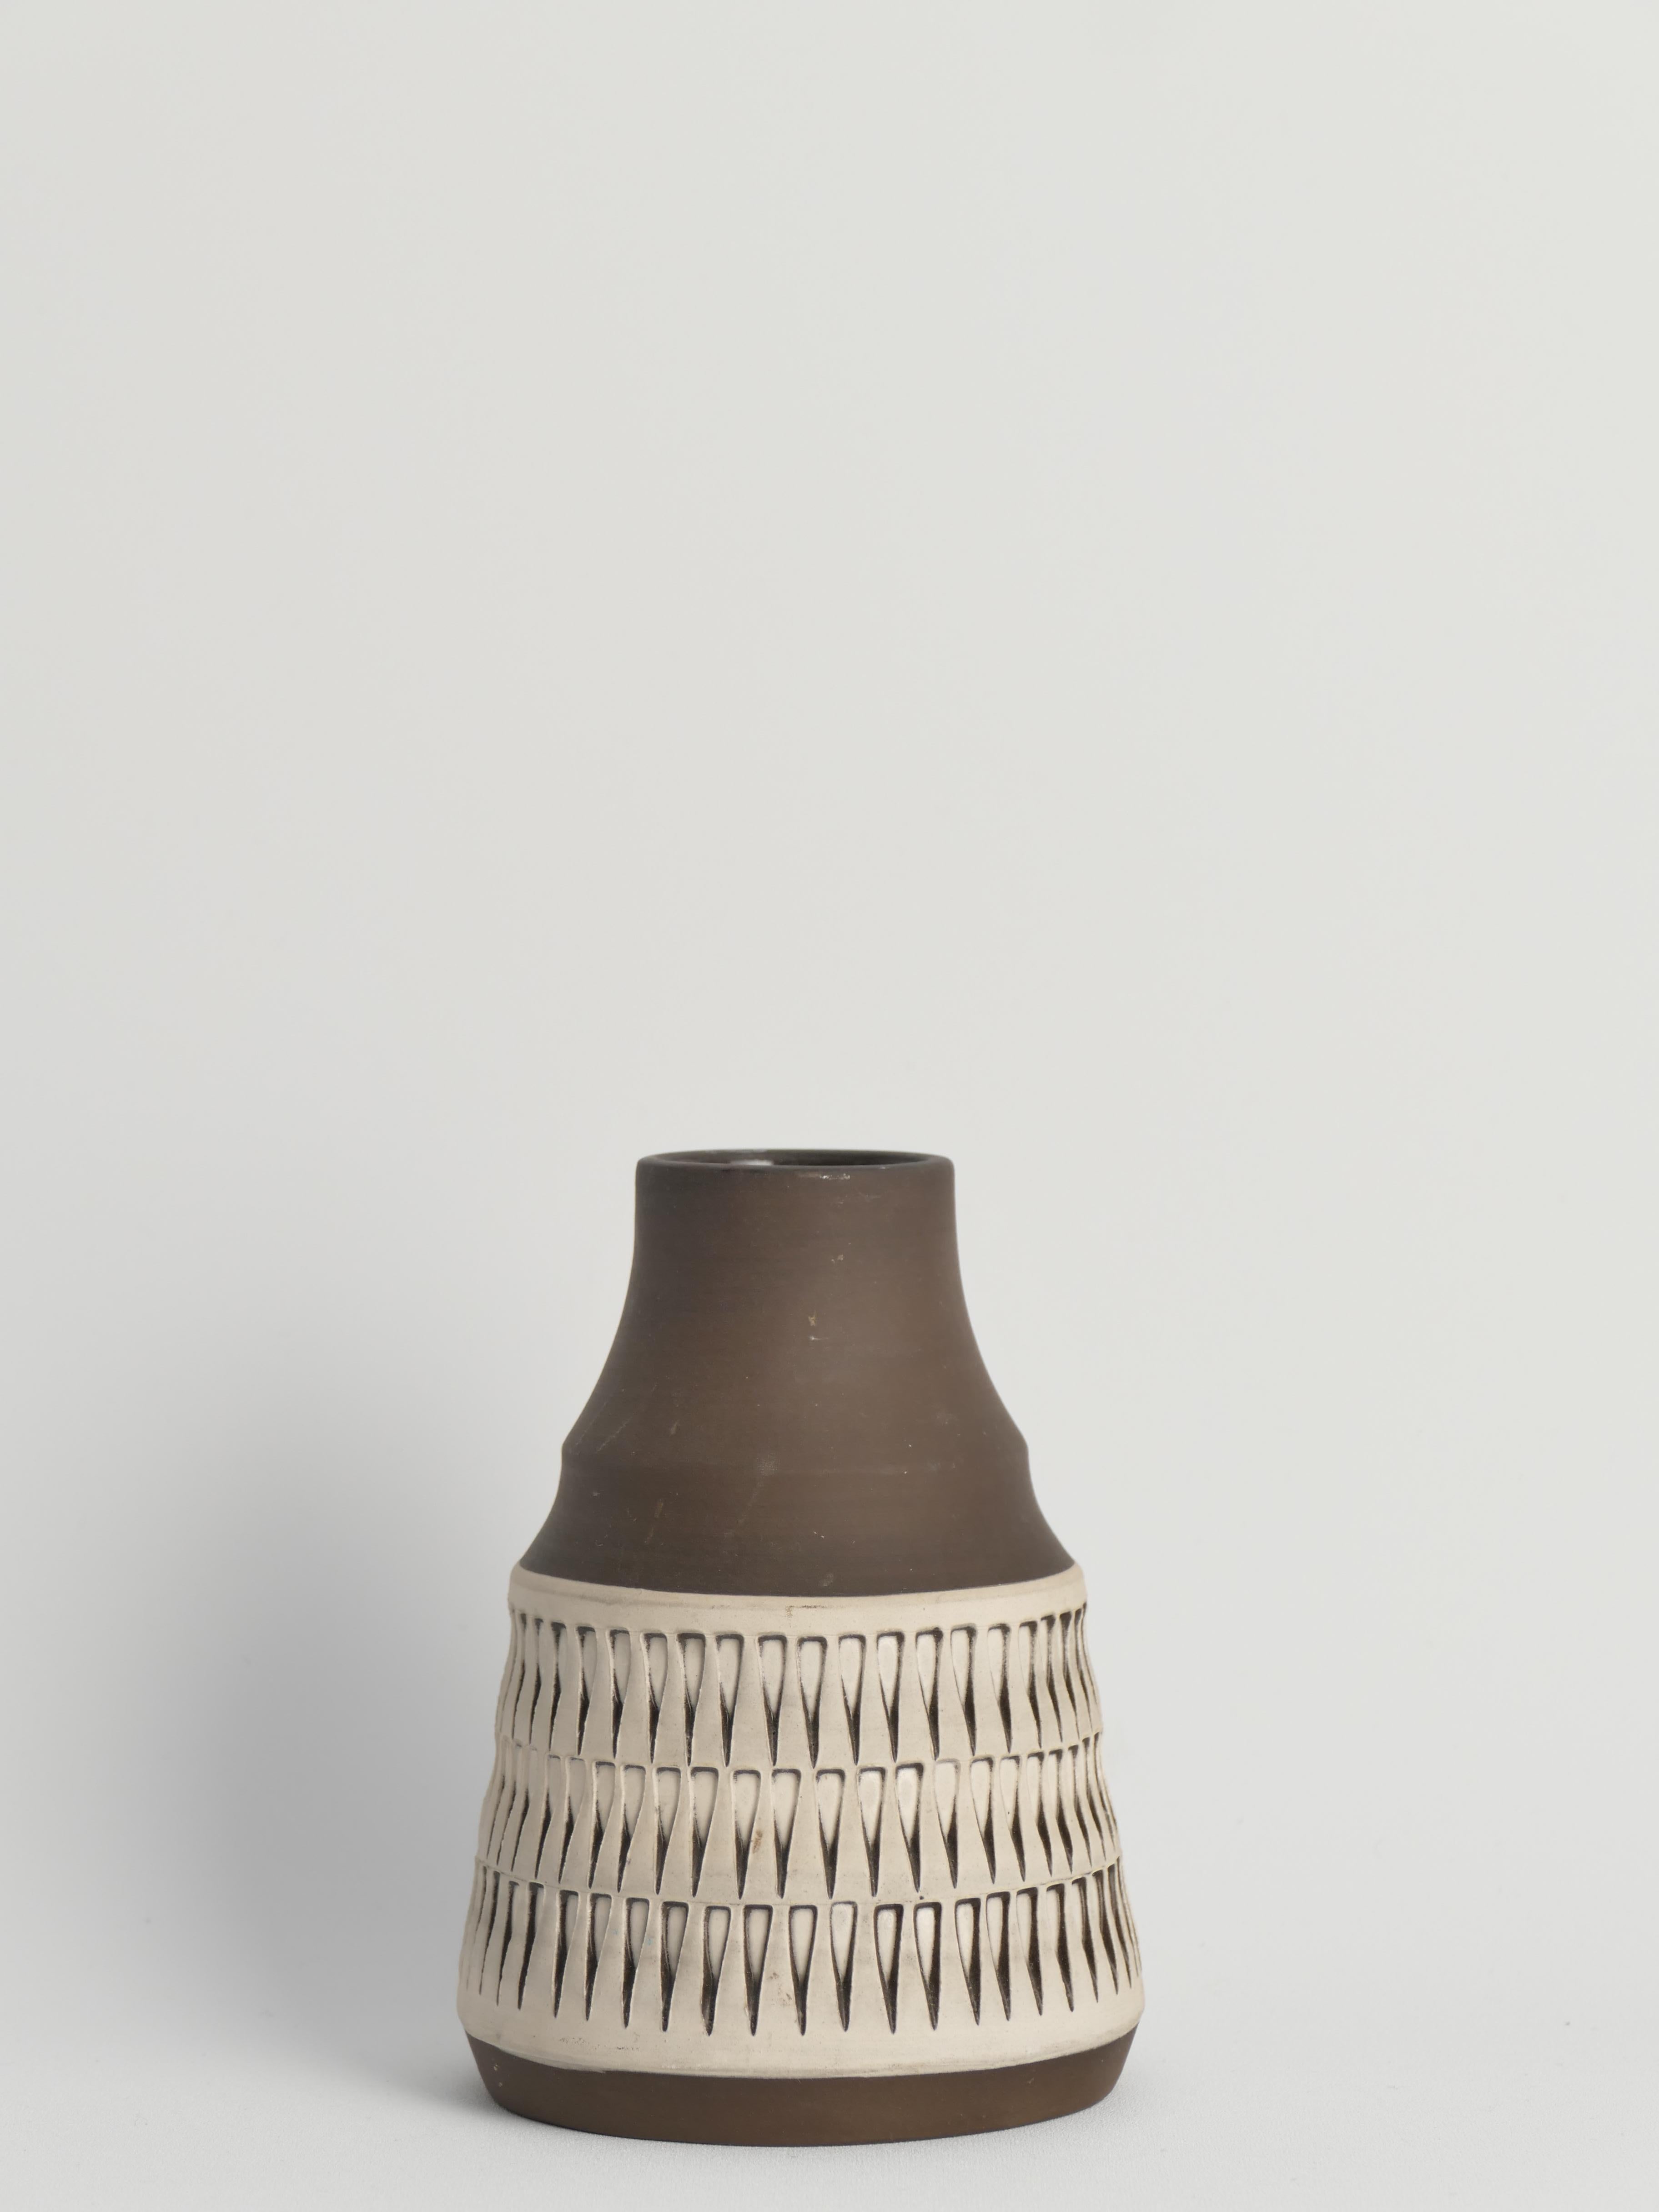 Graphic Scandinavian modern ceramic vase by Tomas Anagrius for Alingsås Keramik.

This striking ceramic vase by Tomas Anagrius for Alingsås Keramik embodies the essence of Scandinavian Modern design with its stylish and graphic aesthetic. Crafted